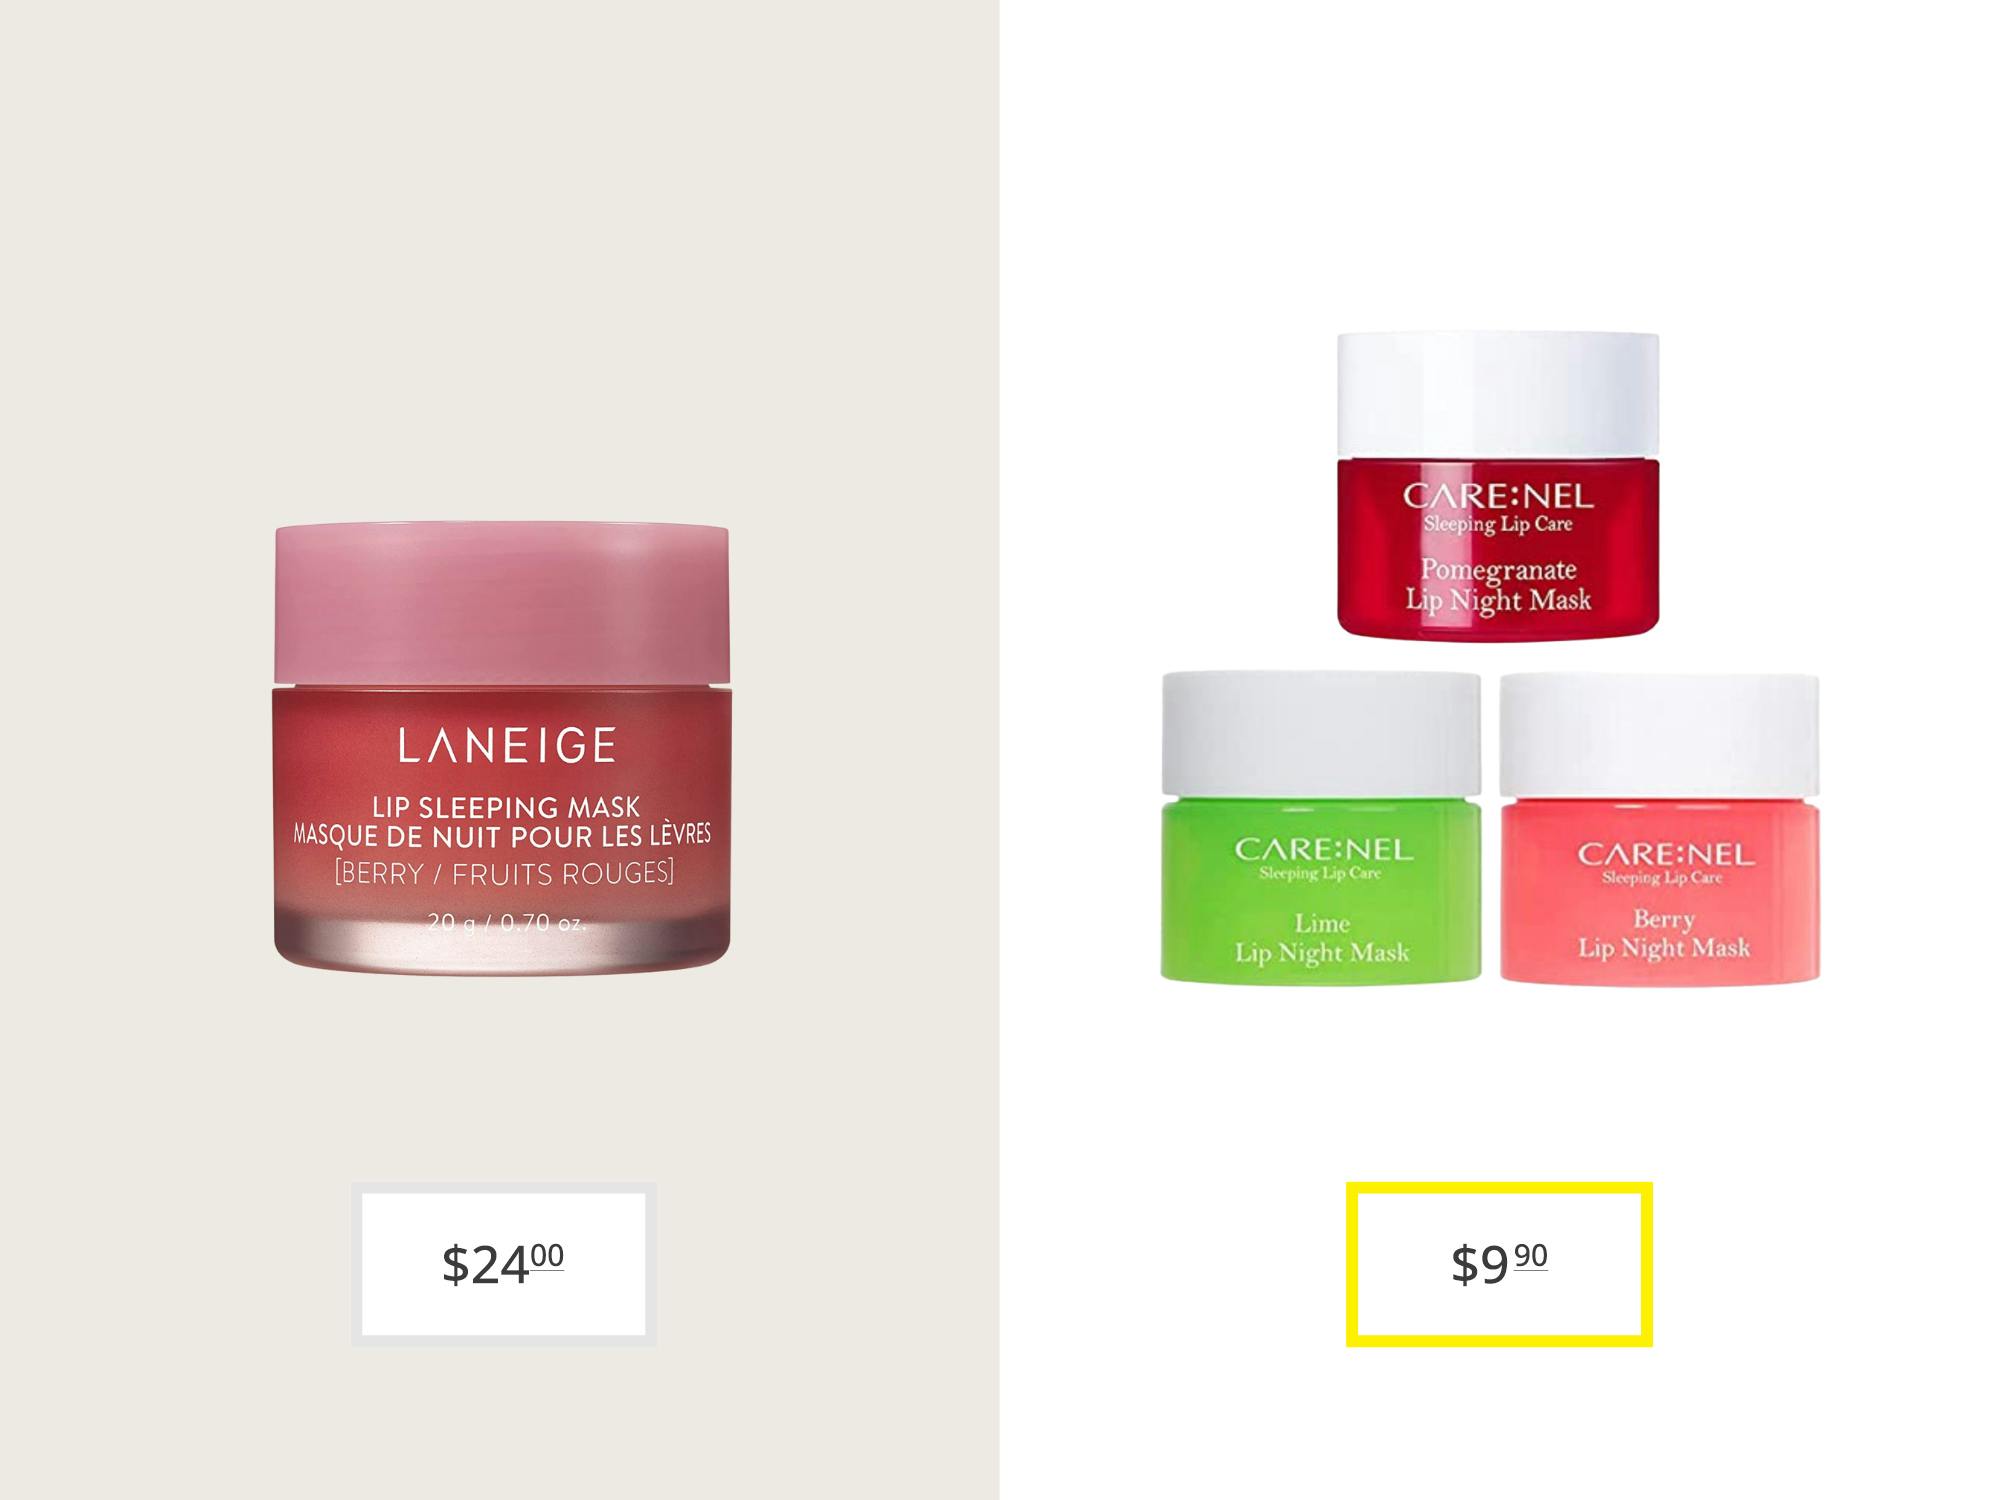 laneige lip sleeping mask and carenel lip sleeping mask three count price comparison graphic